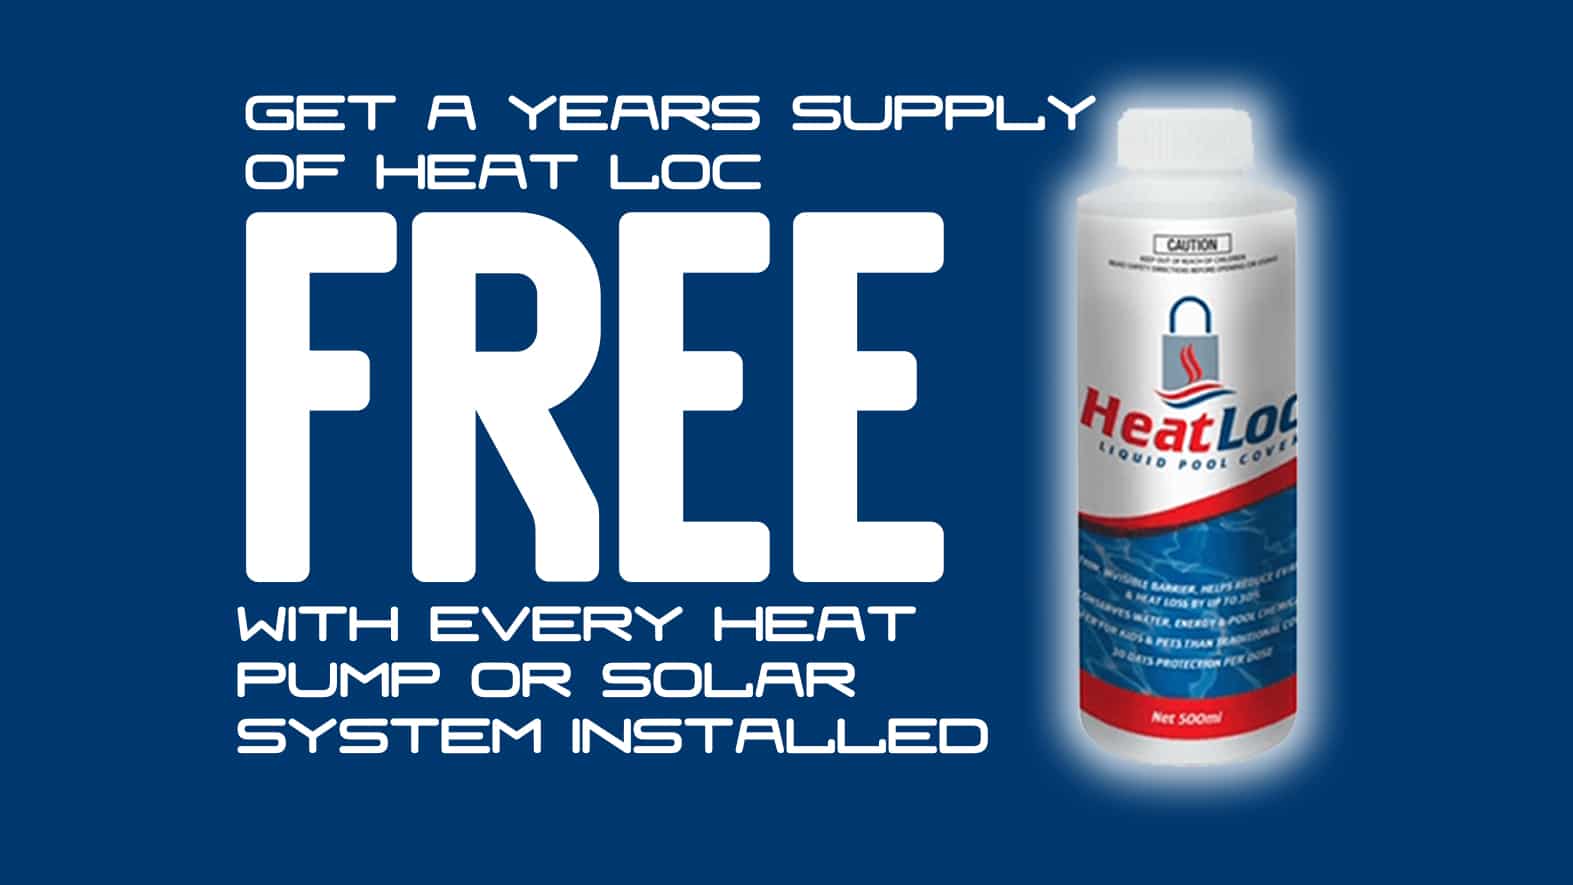 A promotional image offering a free 12-month supply of Heat Loc liquid pool cover with every heat pump or solar system installation. The background is blue, and the image features a bottle of Heat Loc prominently displayed on the right side. Enjoy this exclusive free promotion today! | AES Pool Heating Solutions